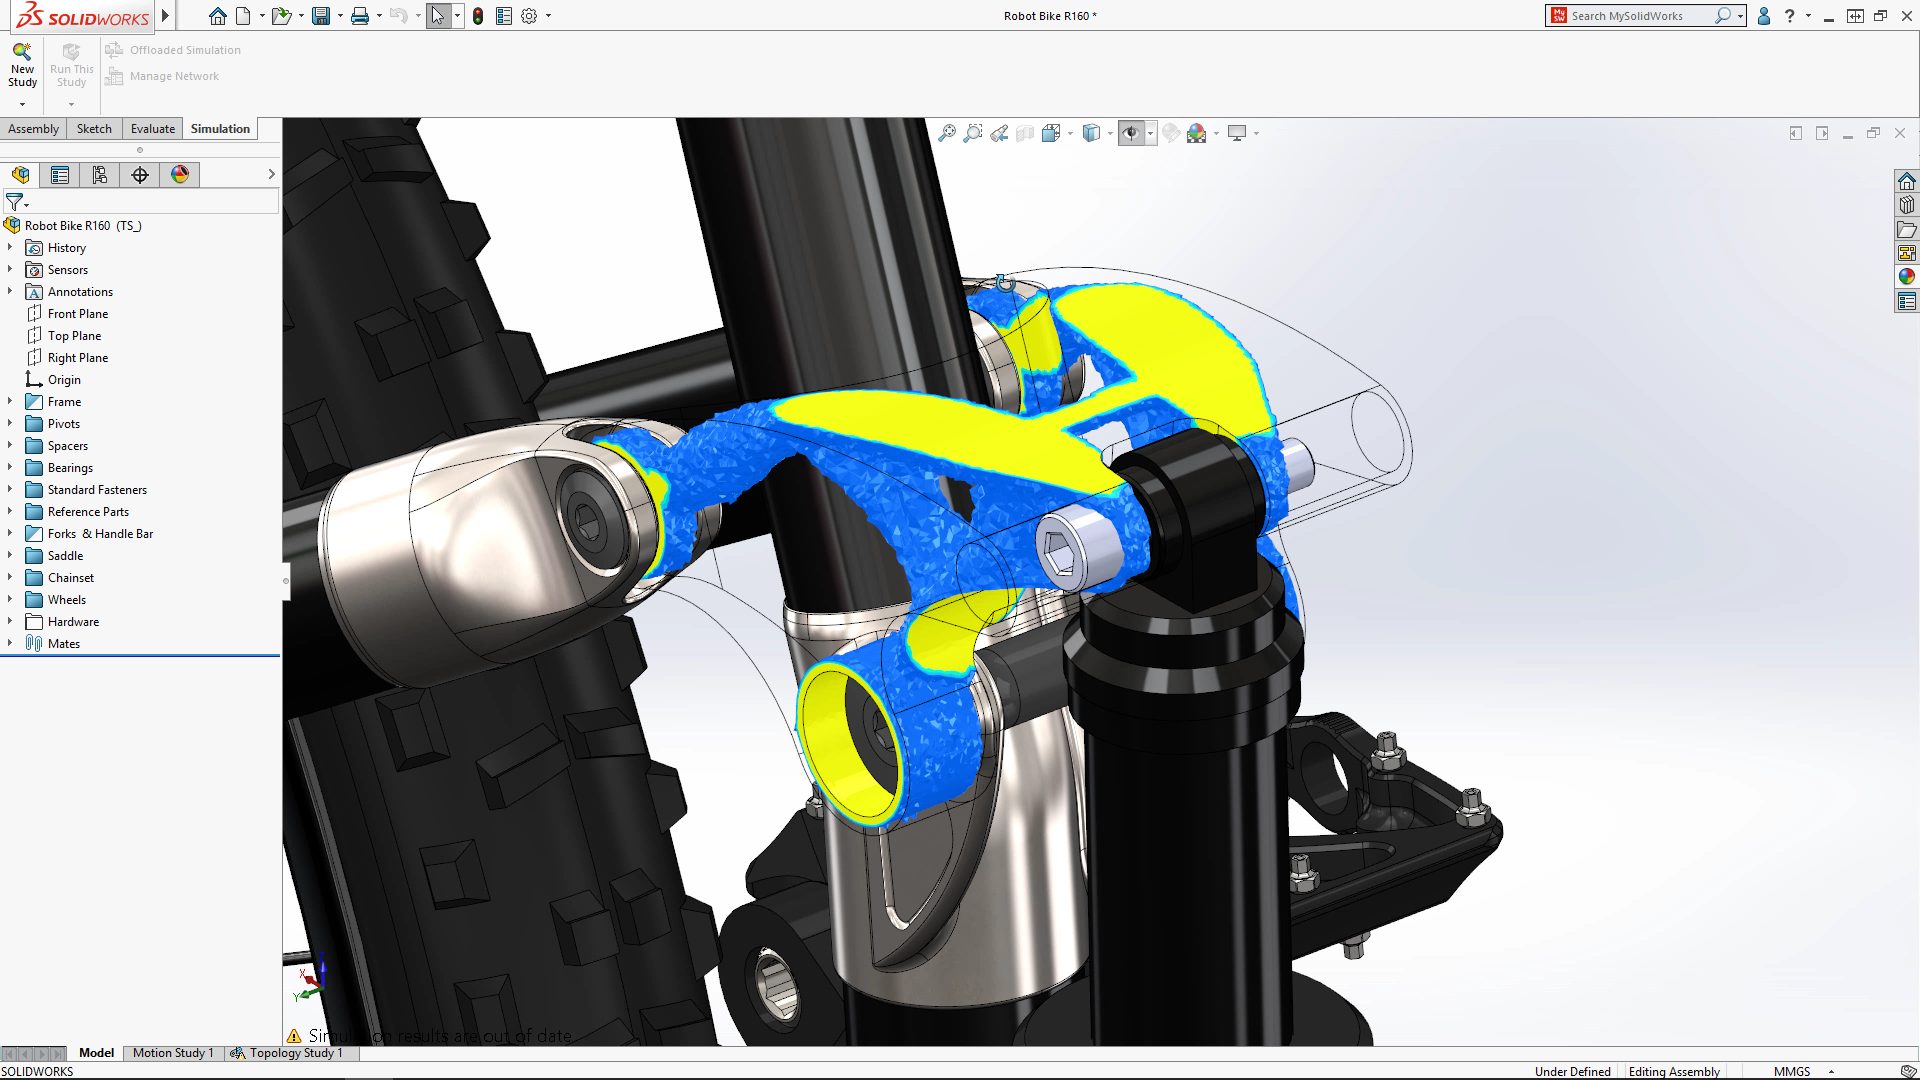 solidworks 2019 trial download